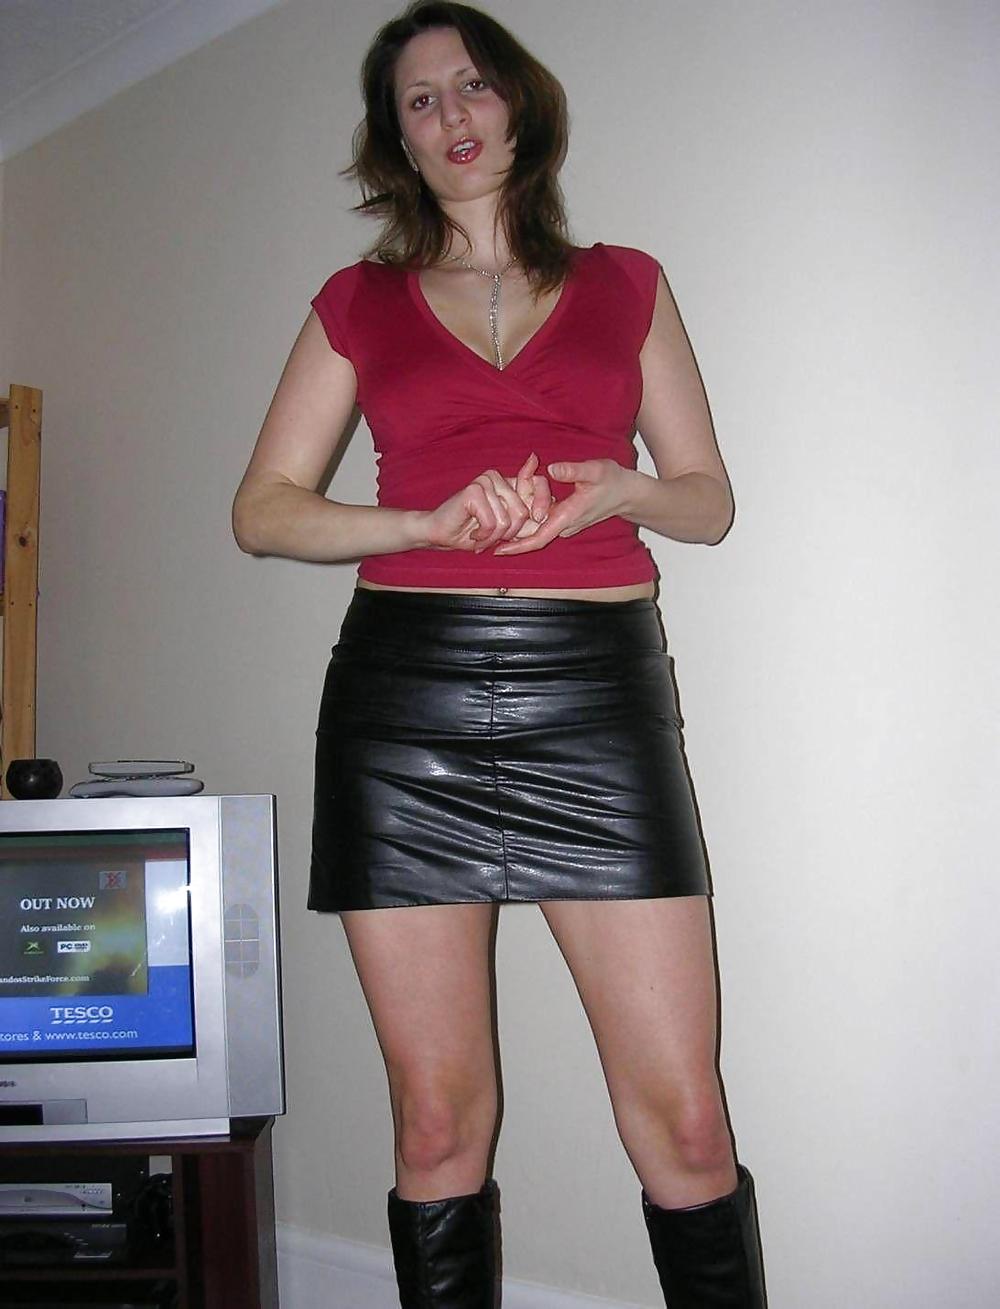 Sex hotlegs-latex and leather skirt amateurs image